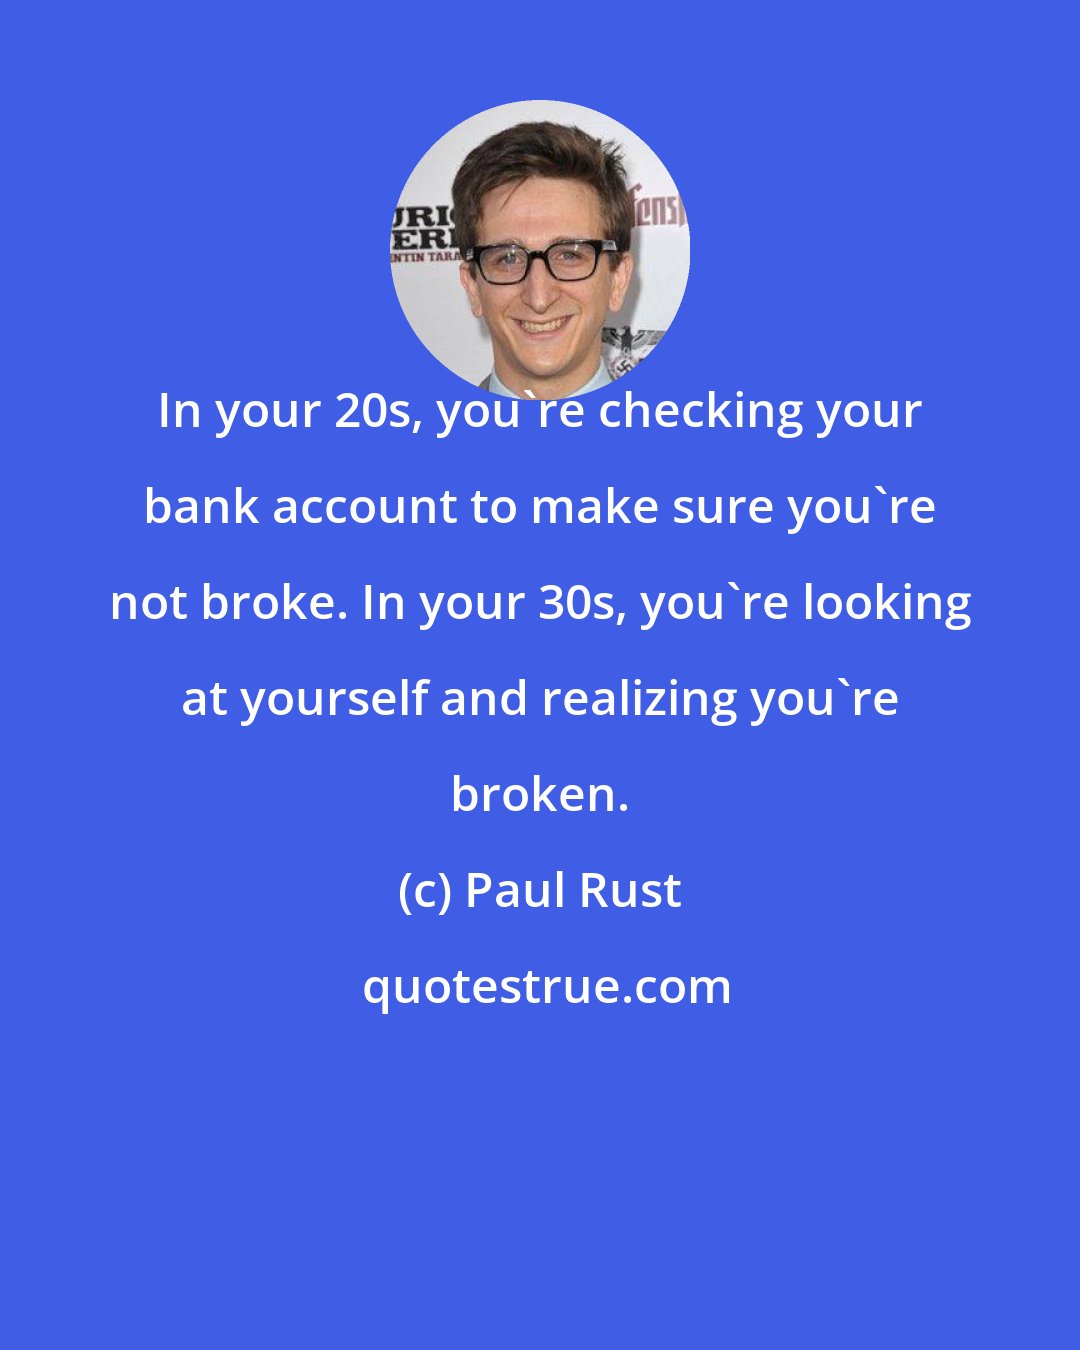 Paul Rust: In your 20s, you're checking your bank account to make sure you're not broke. In your 30s, you're looking at yourself and realizing you're broken.